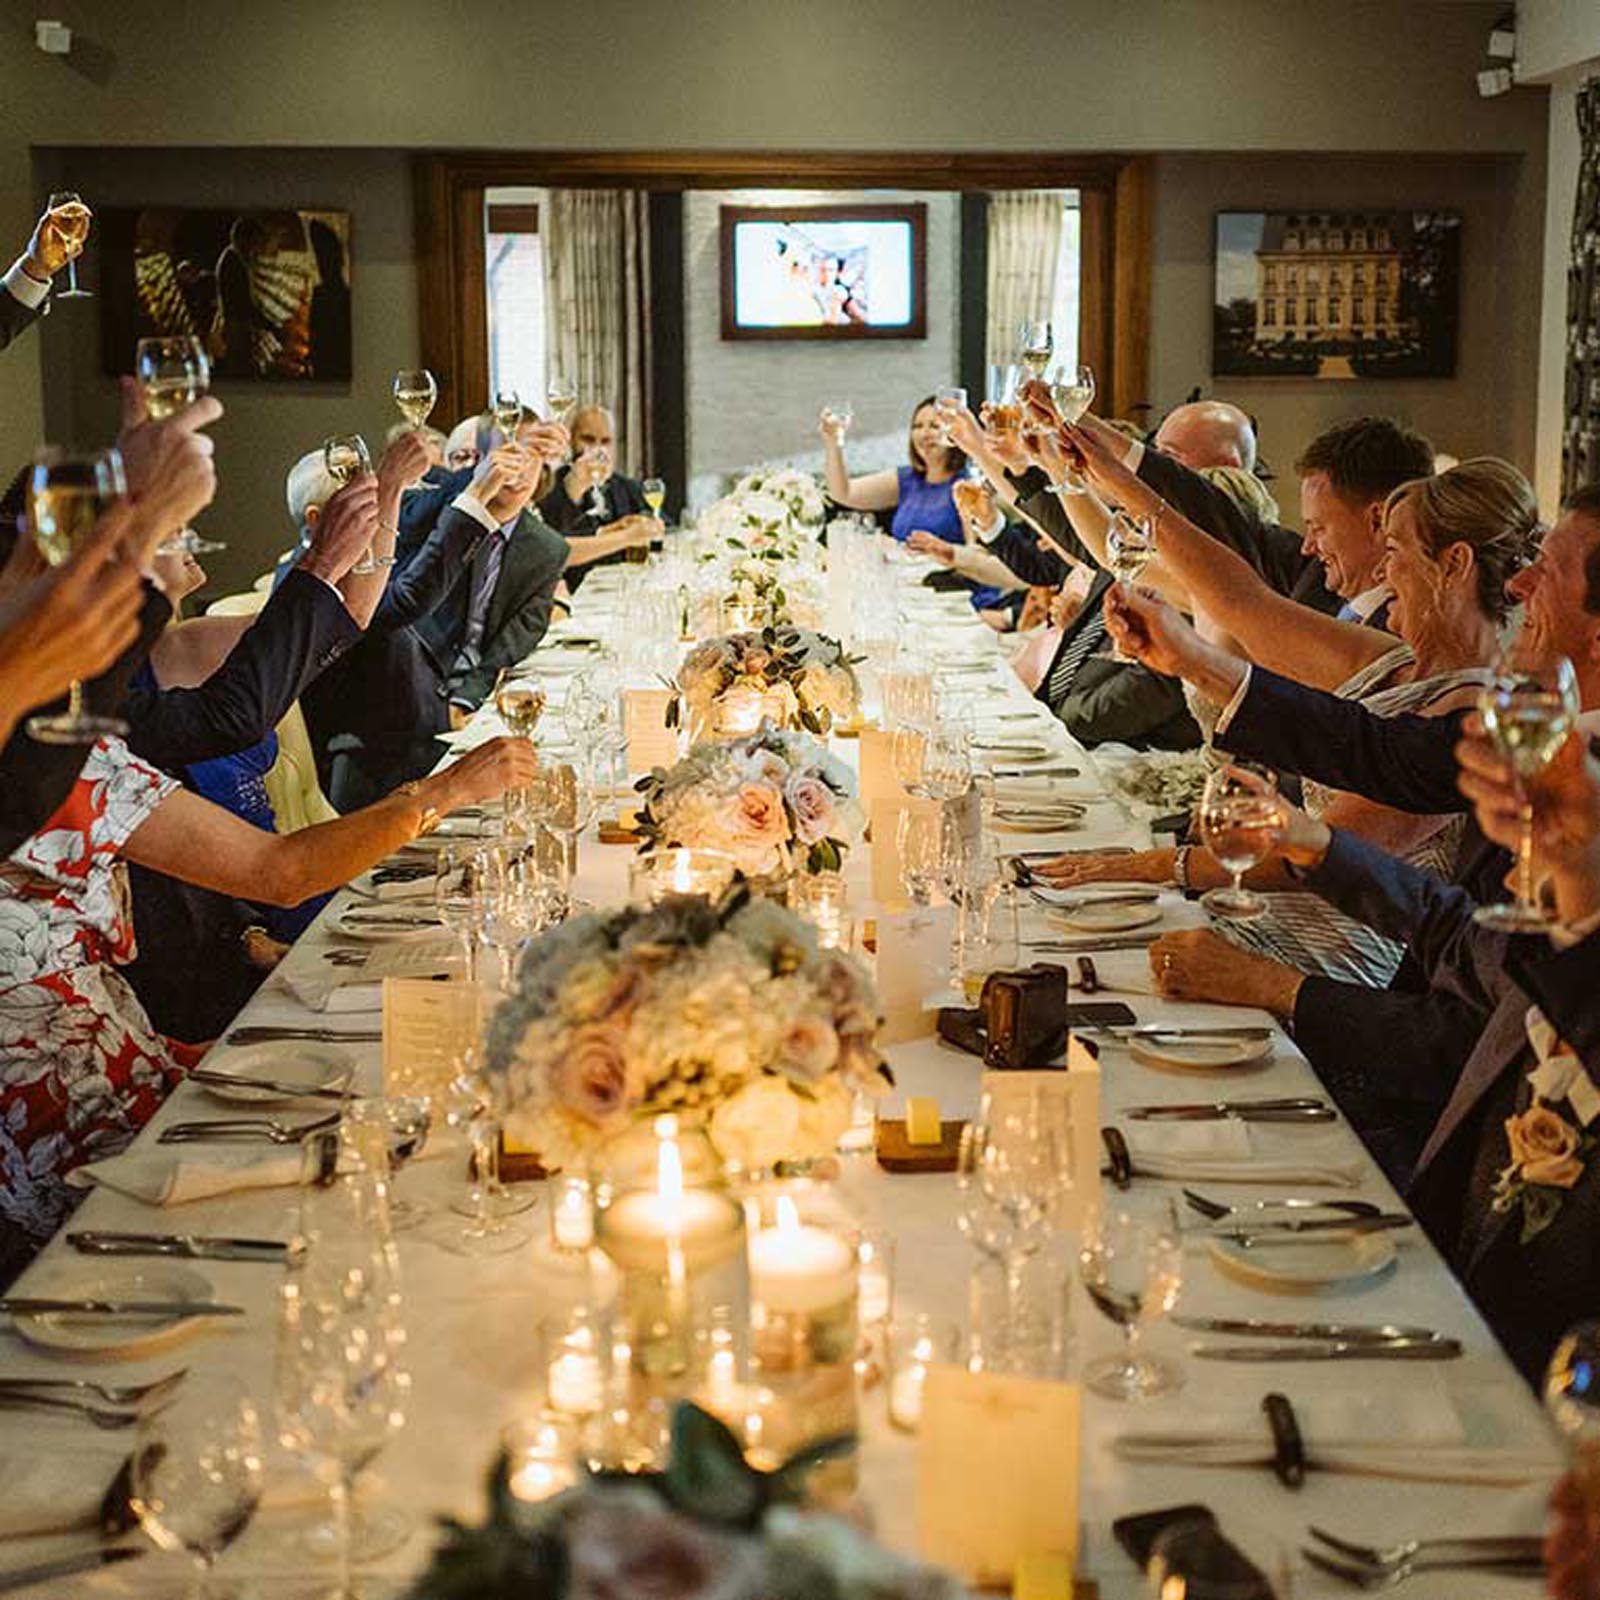 Guests raising a glass in the private dining area